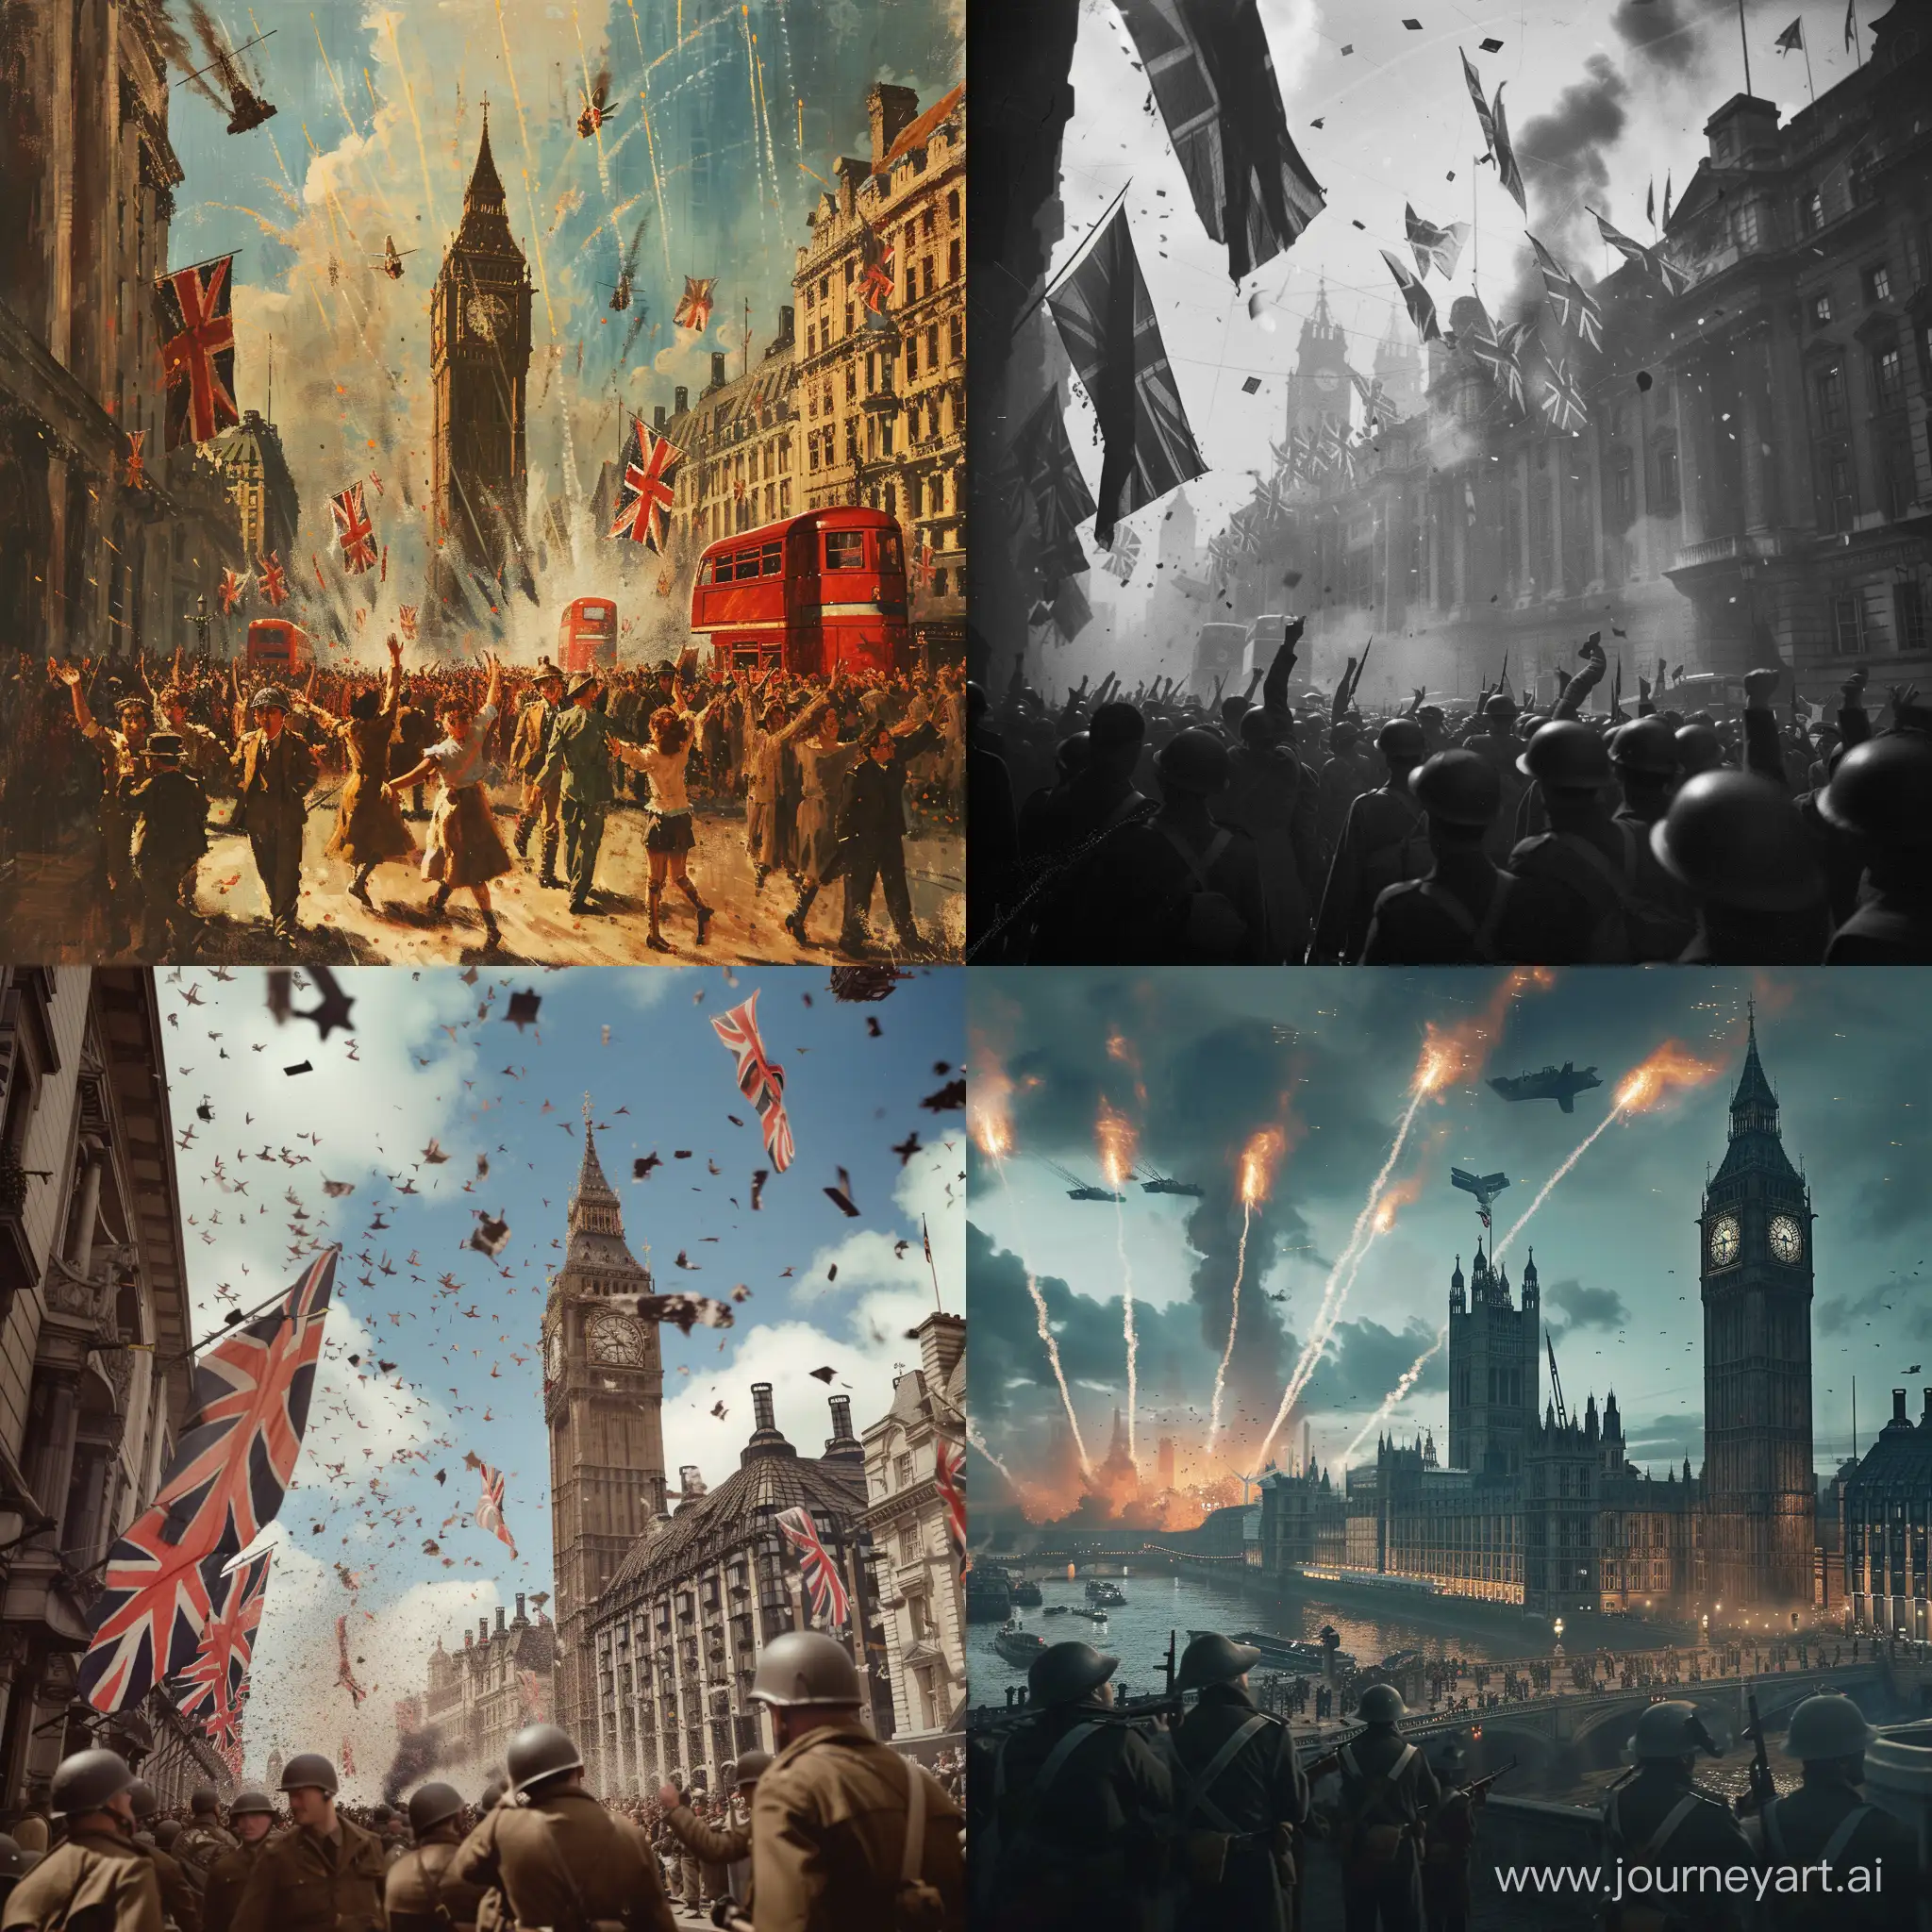 Alternative ending to ww2, showing the victors celebrating in London city